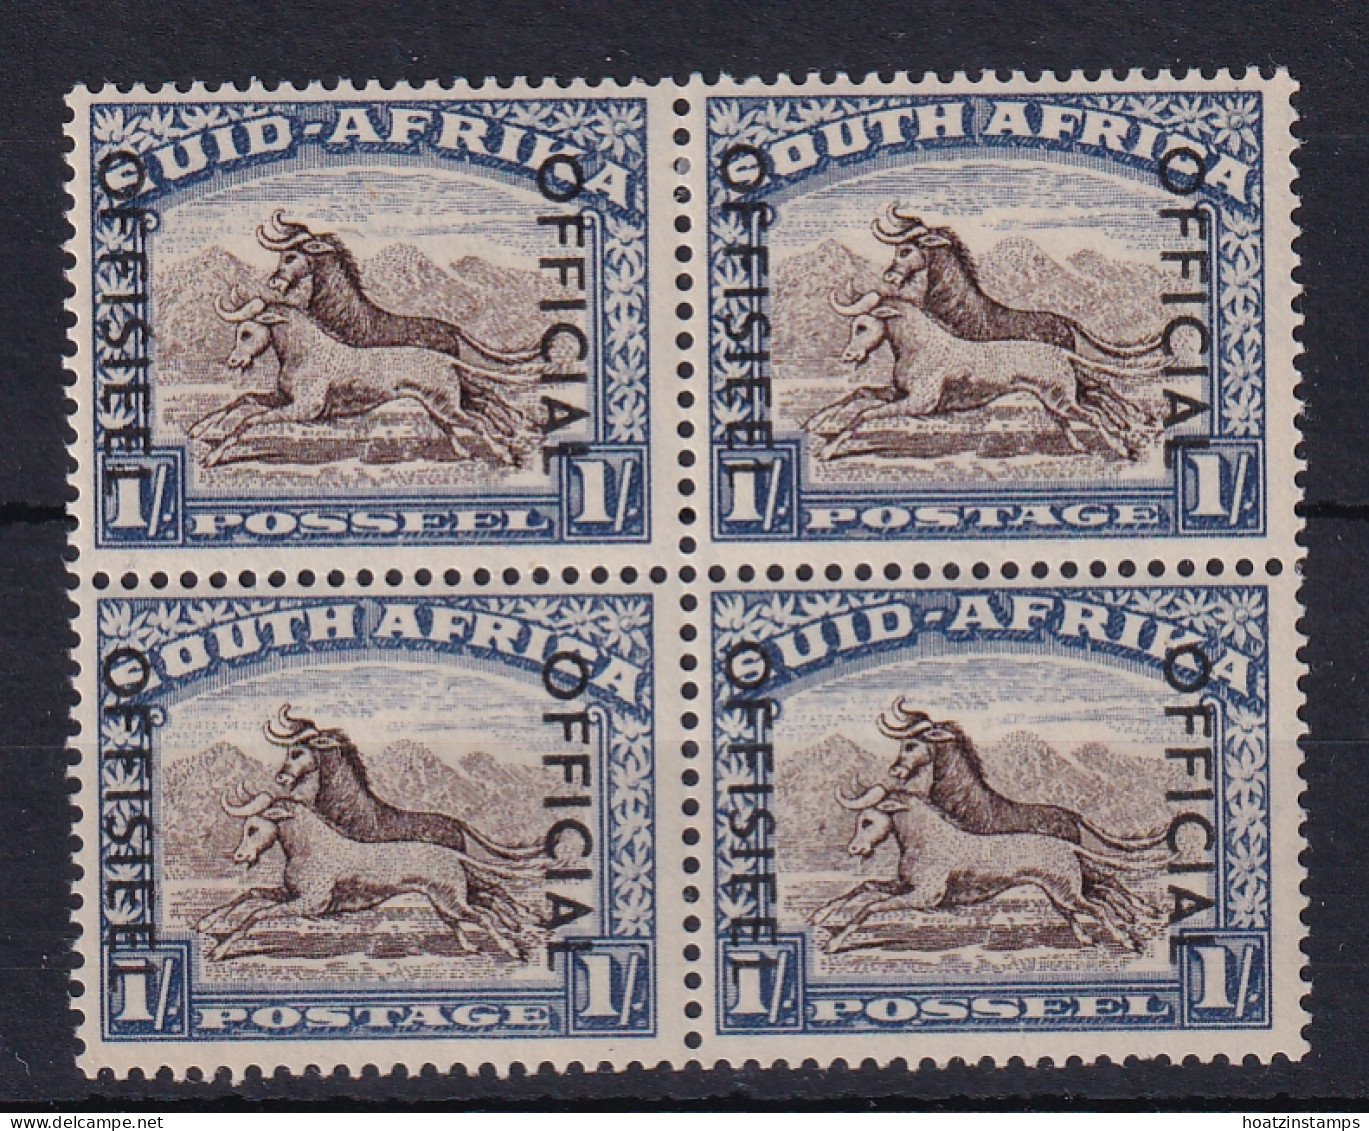 South Africa: 1950/54   Official - Wildebeest   SG O47a    1/-    Blackish Brown & Ultramarine  MNH Block Of 4 - Service